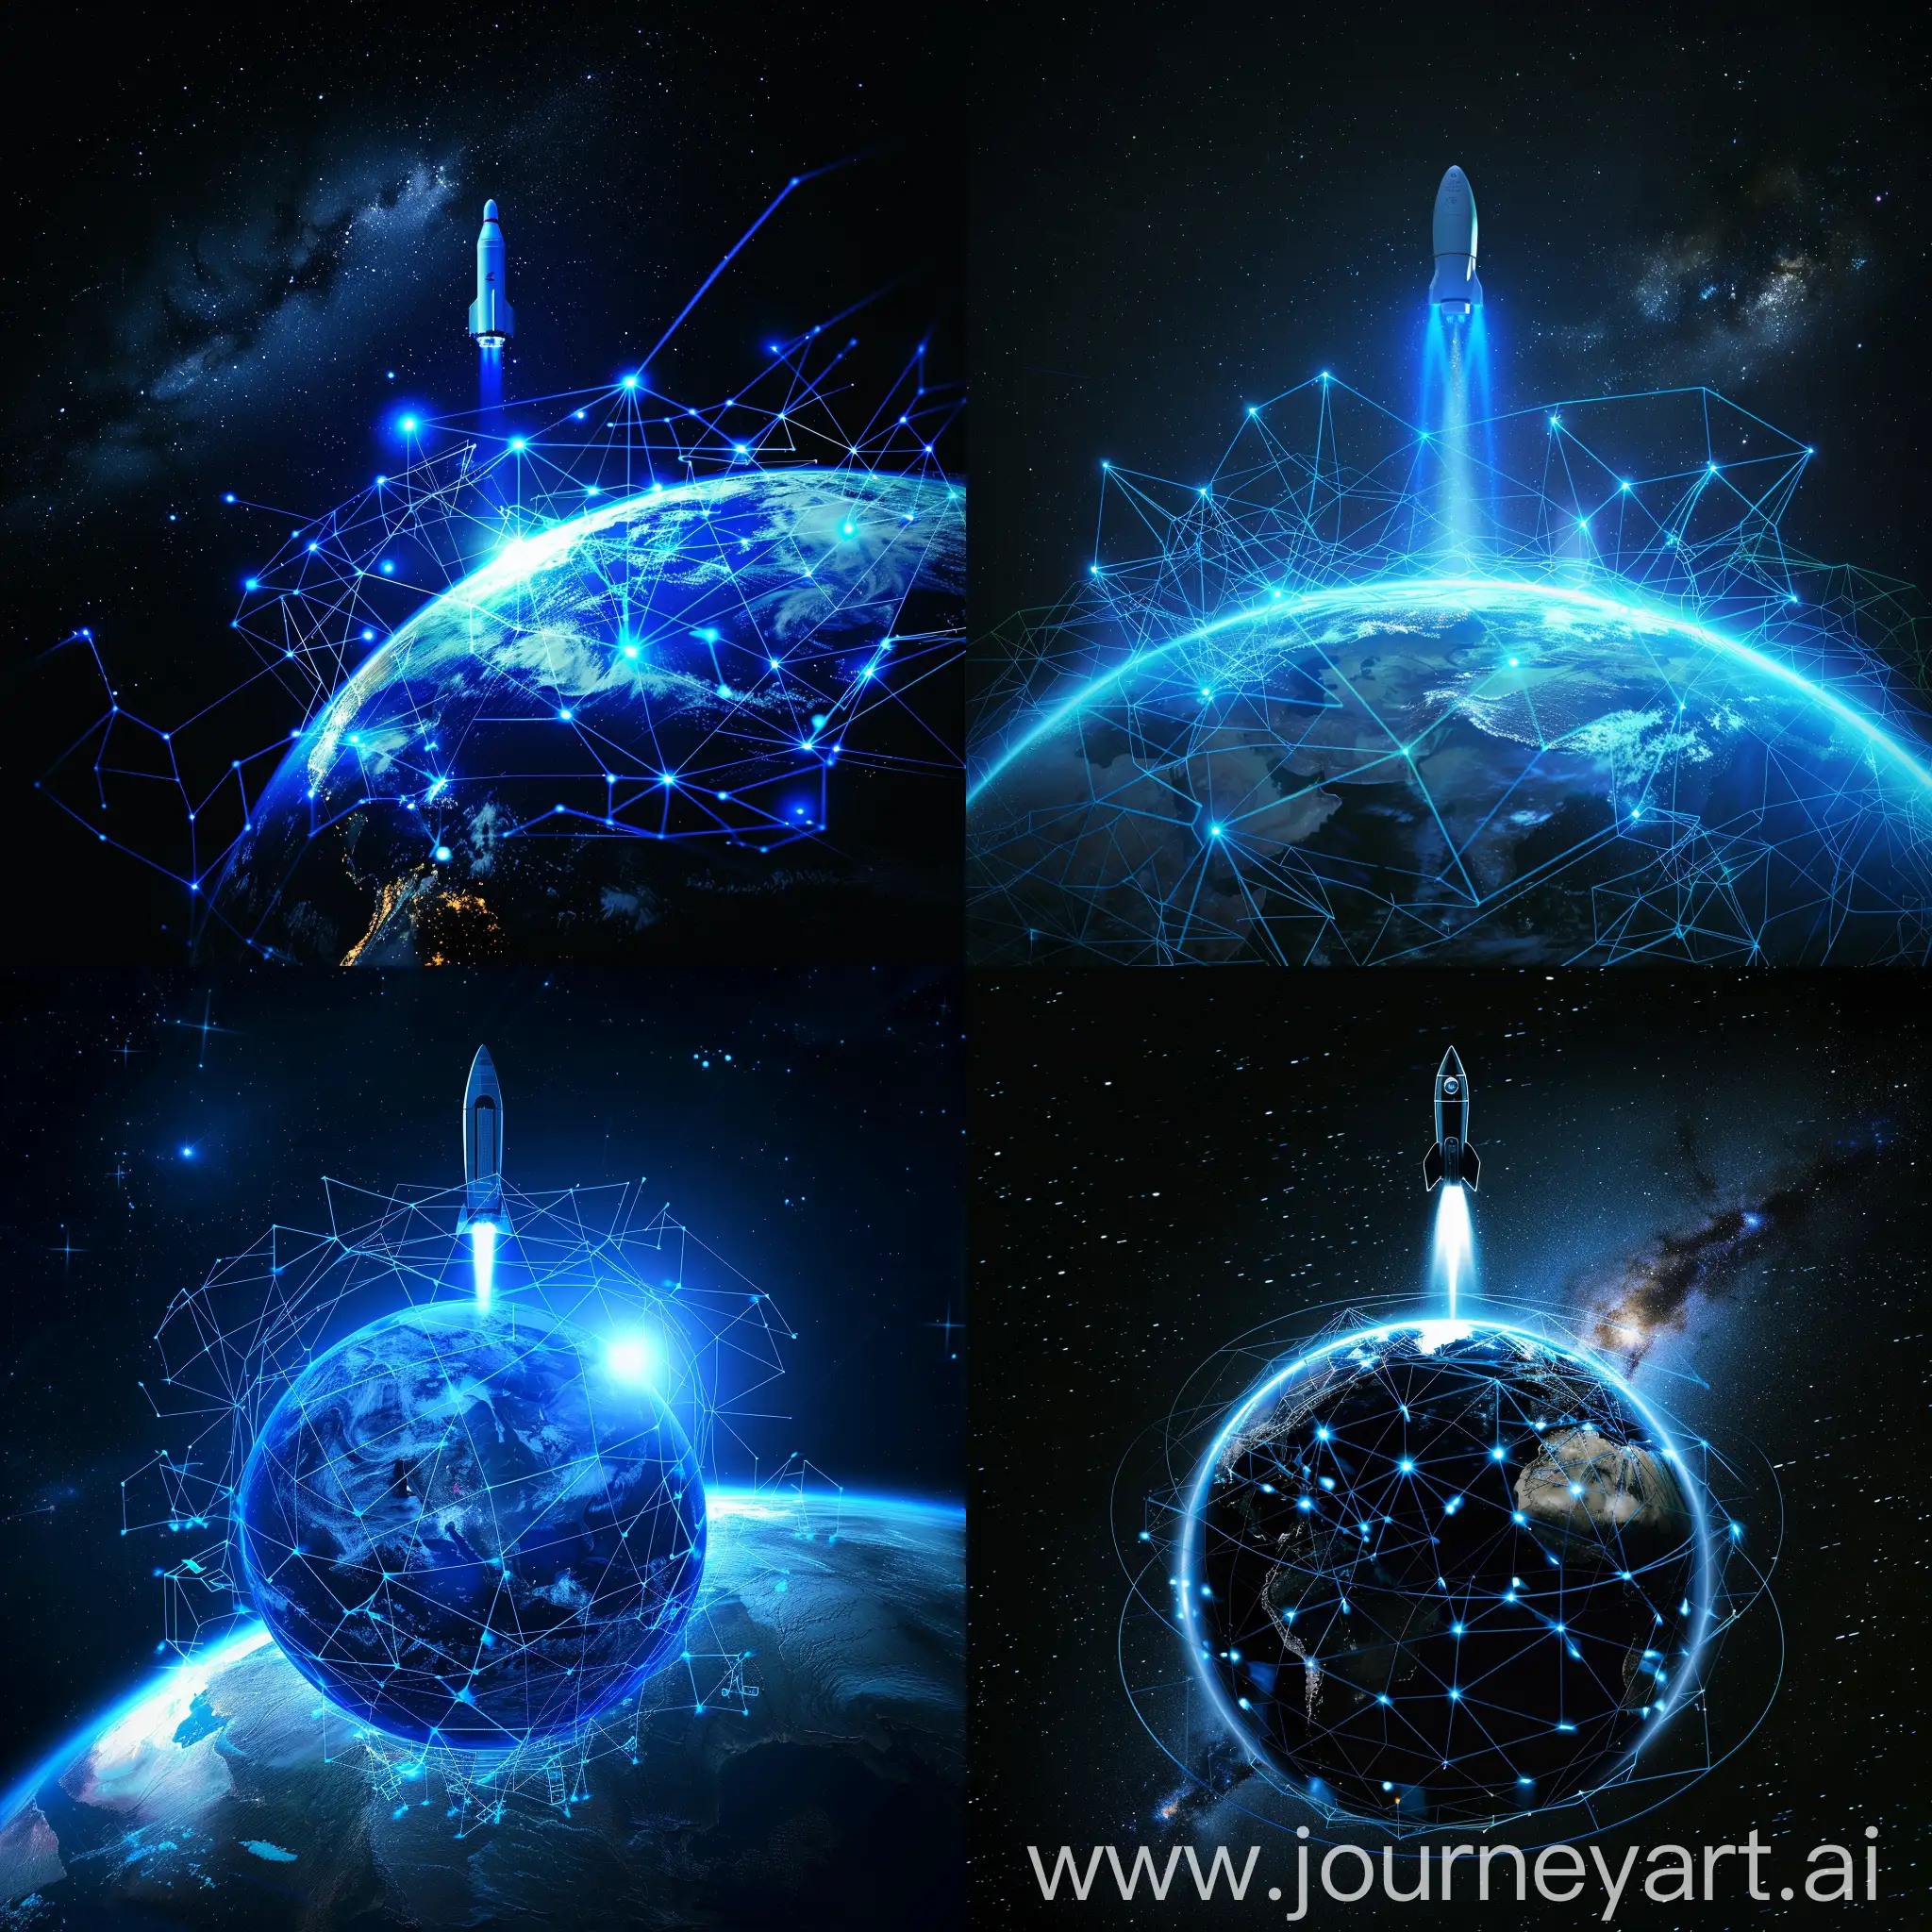 Digitized-Earth-Connected-by-Blue-Network-with-Rocket-in-Background